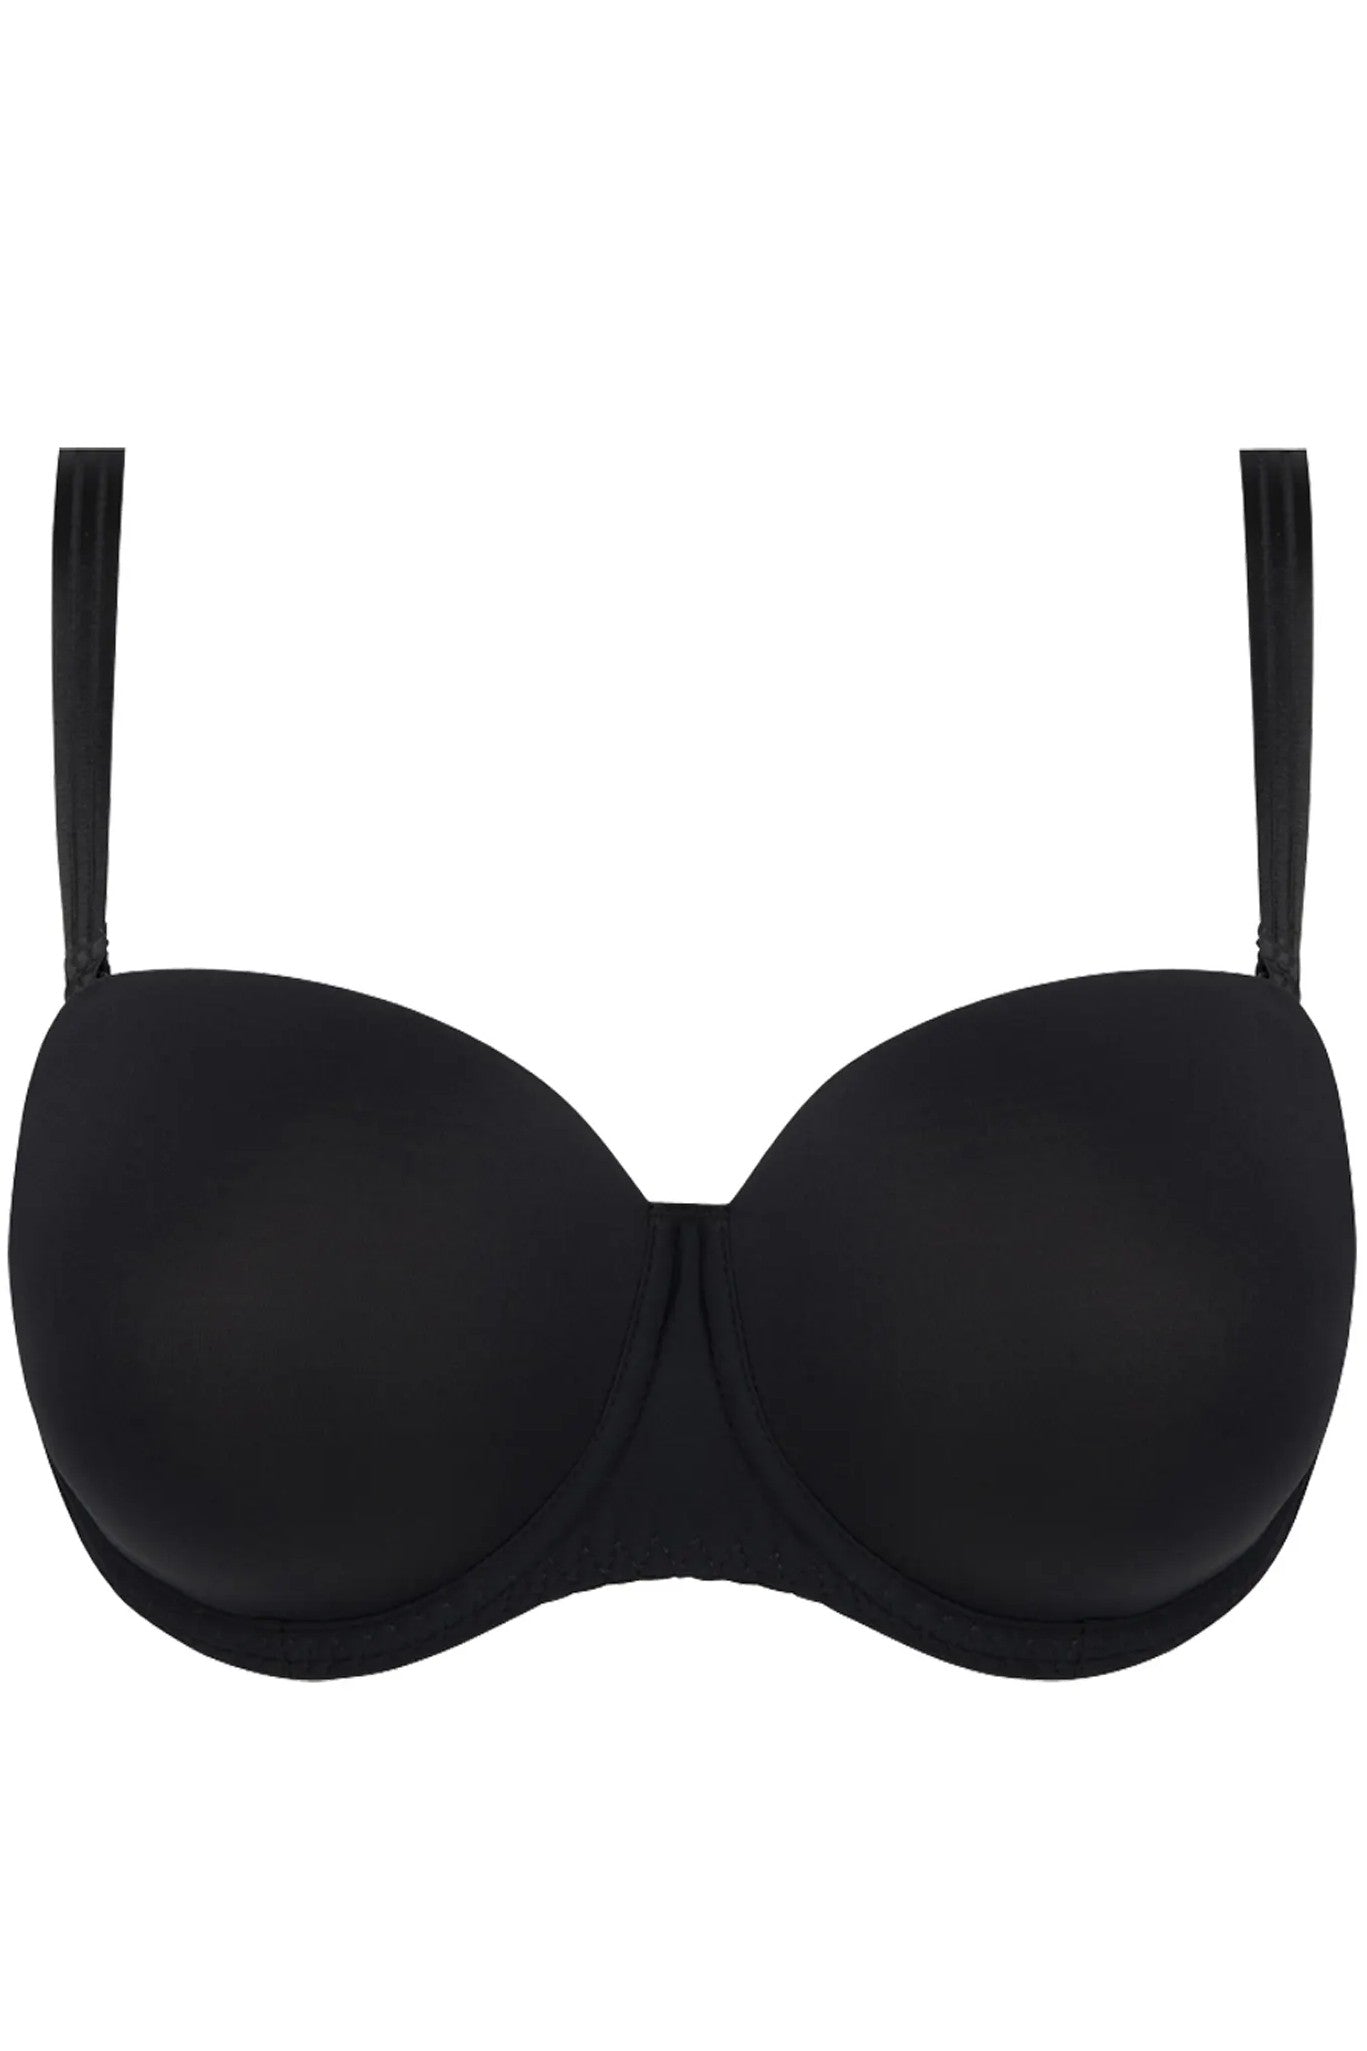 gvdentm Strapless Bra Strapless Bra for Women Wirefree Non-Slip Silicone  Bandeau Bra Seamless Padded Comfy Tube To